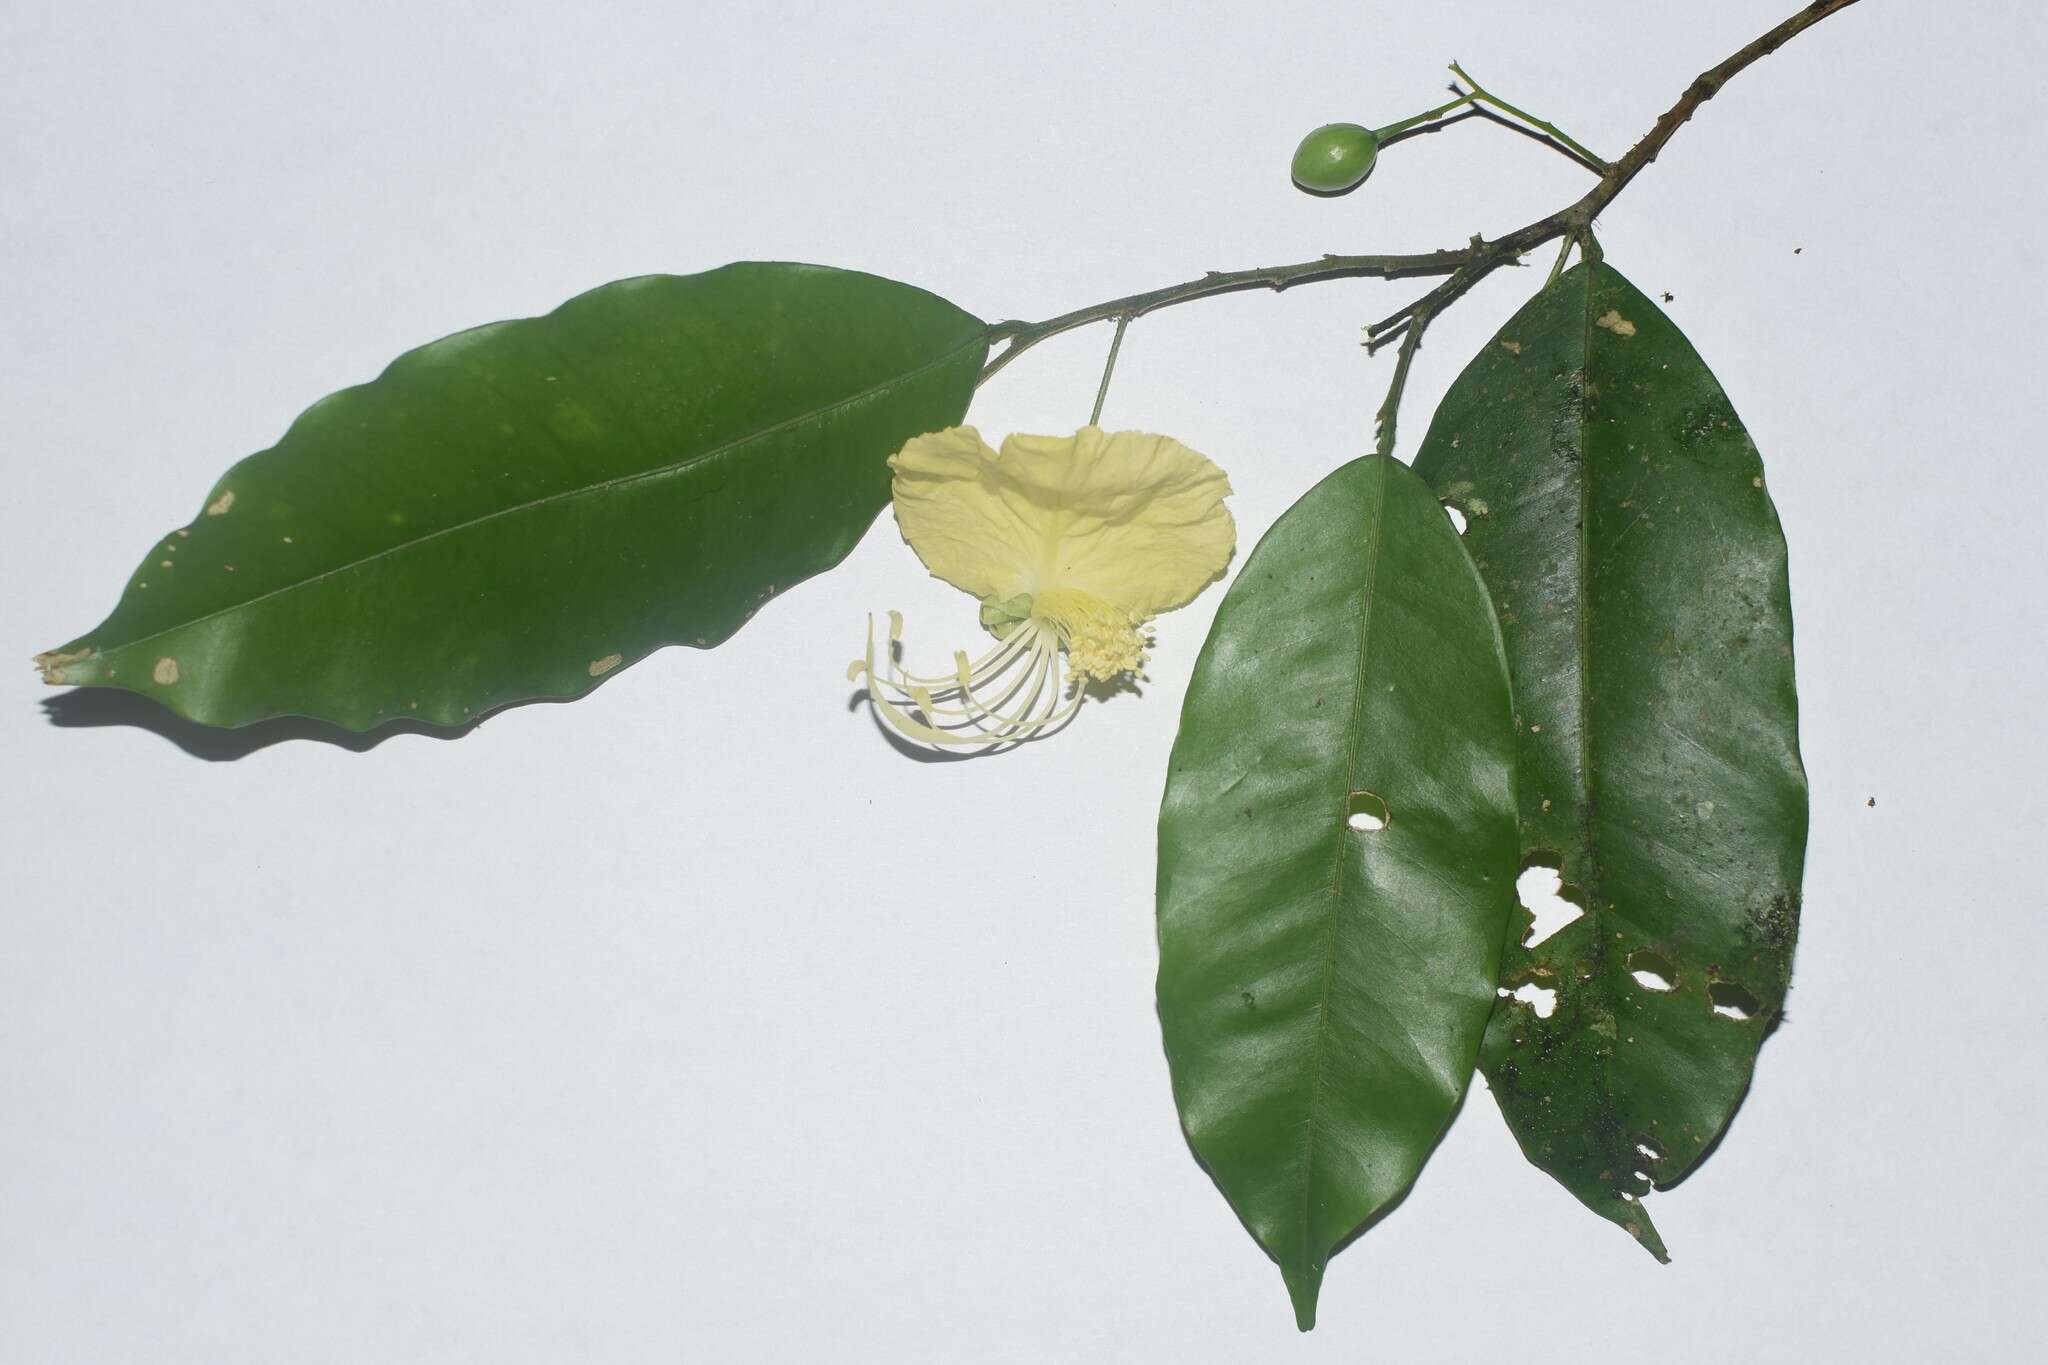 Image of Swartzieae